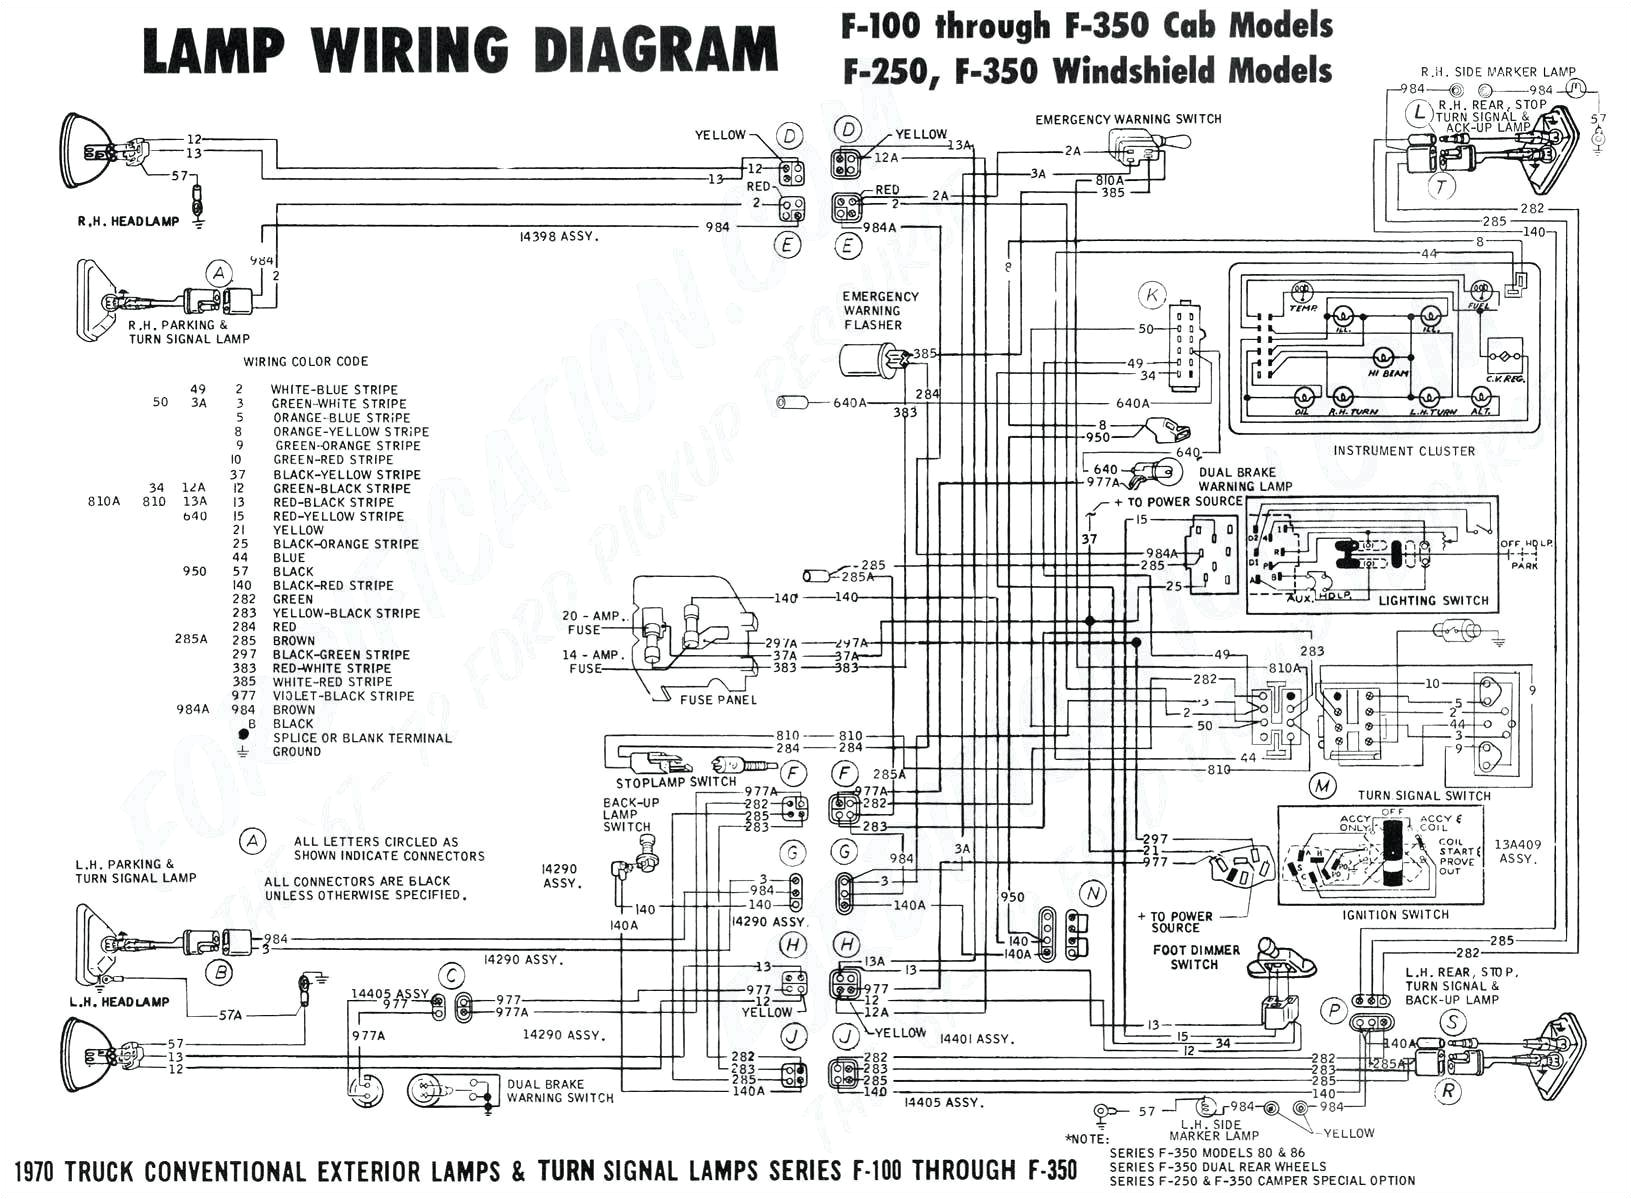 double light switch wiring fresh wiring two schematics together diagram wiring diagram of double light switch wiring jpg